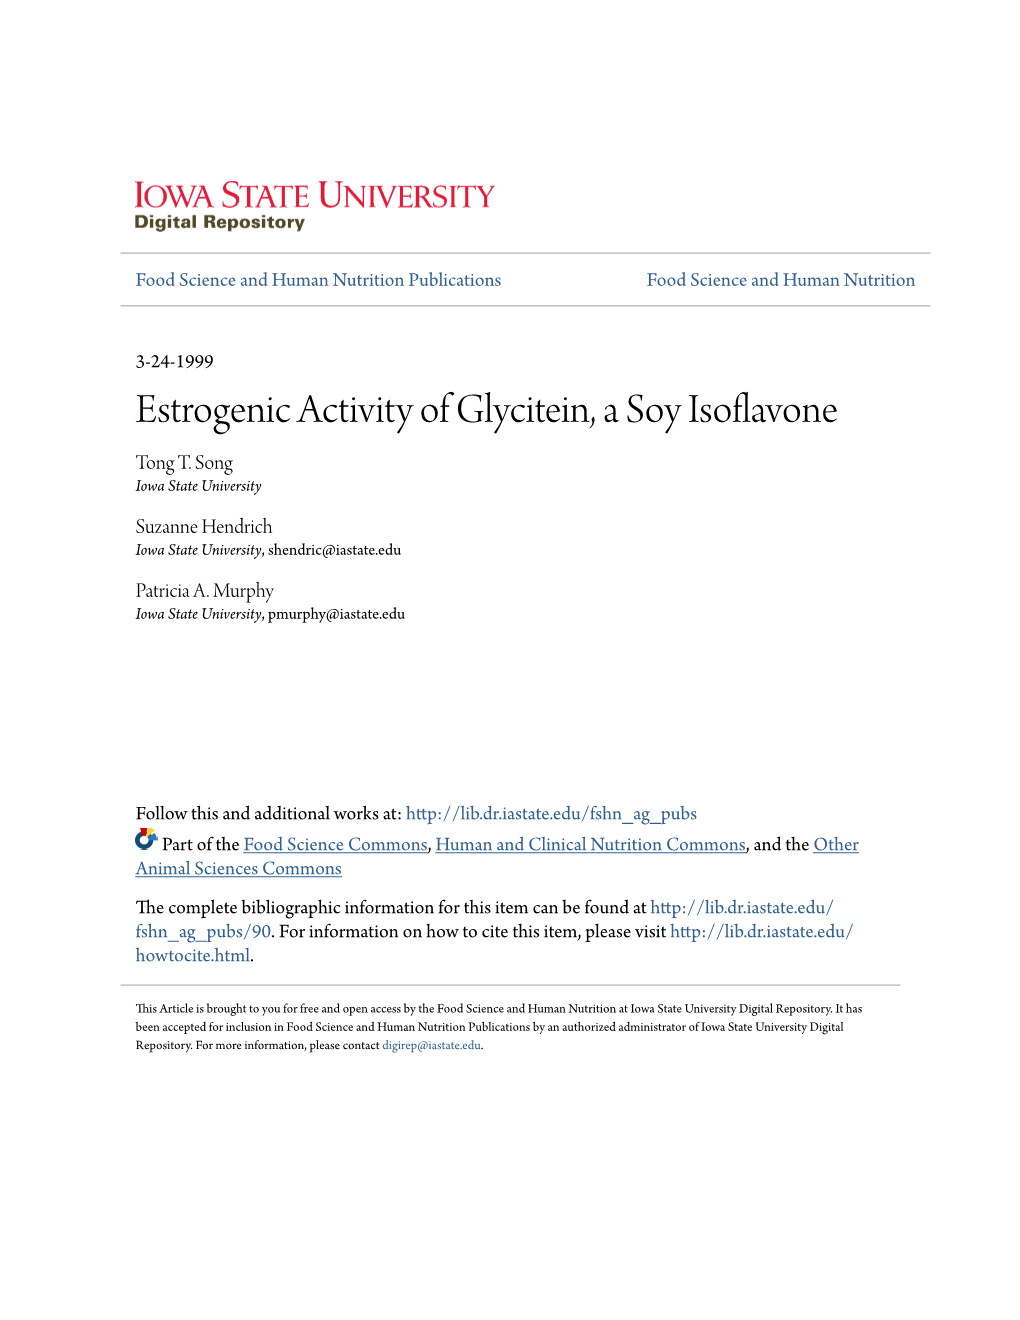 Estrogenic Activity of Glycitein, a Soy Isoflavone Tong T